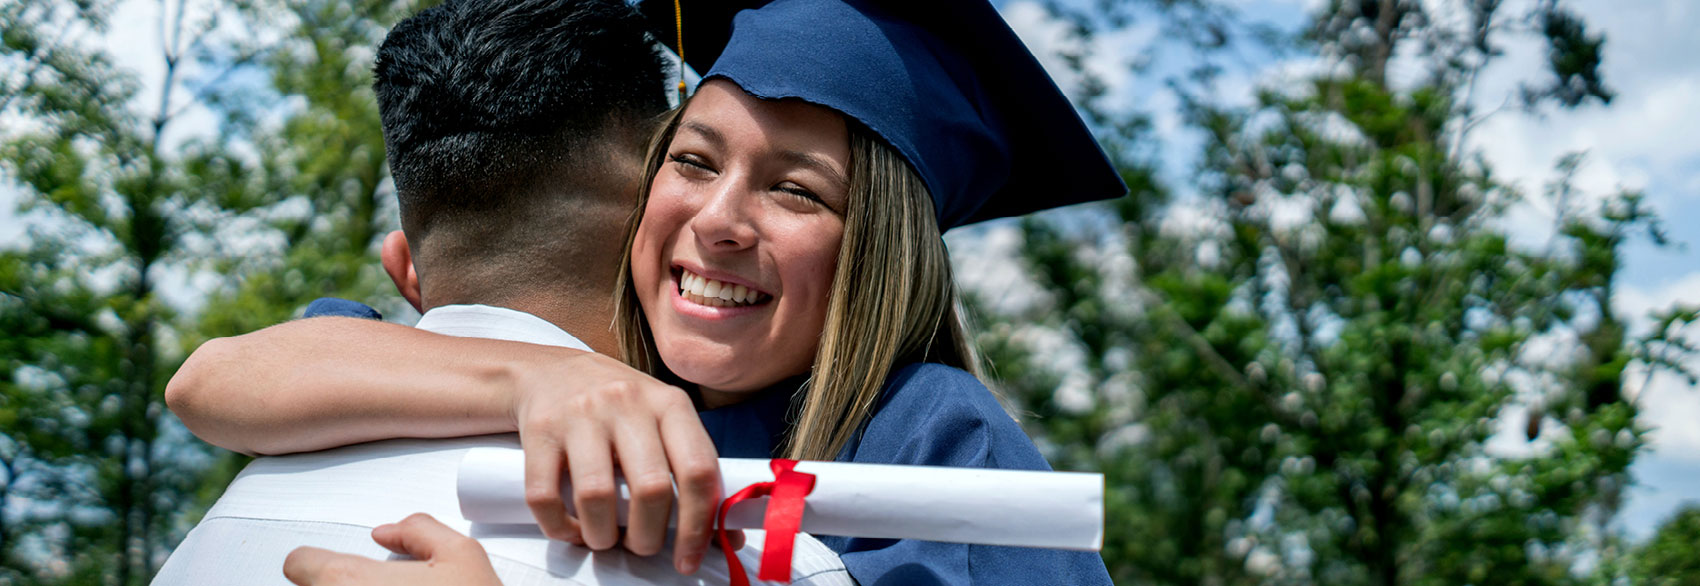 Graduation with woman hugging a man